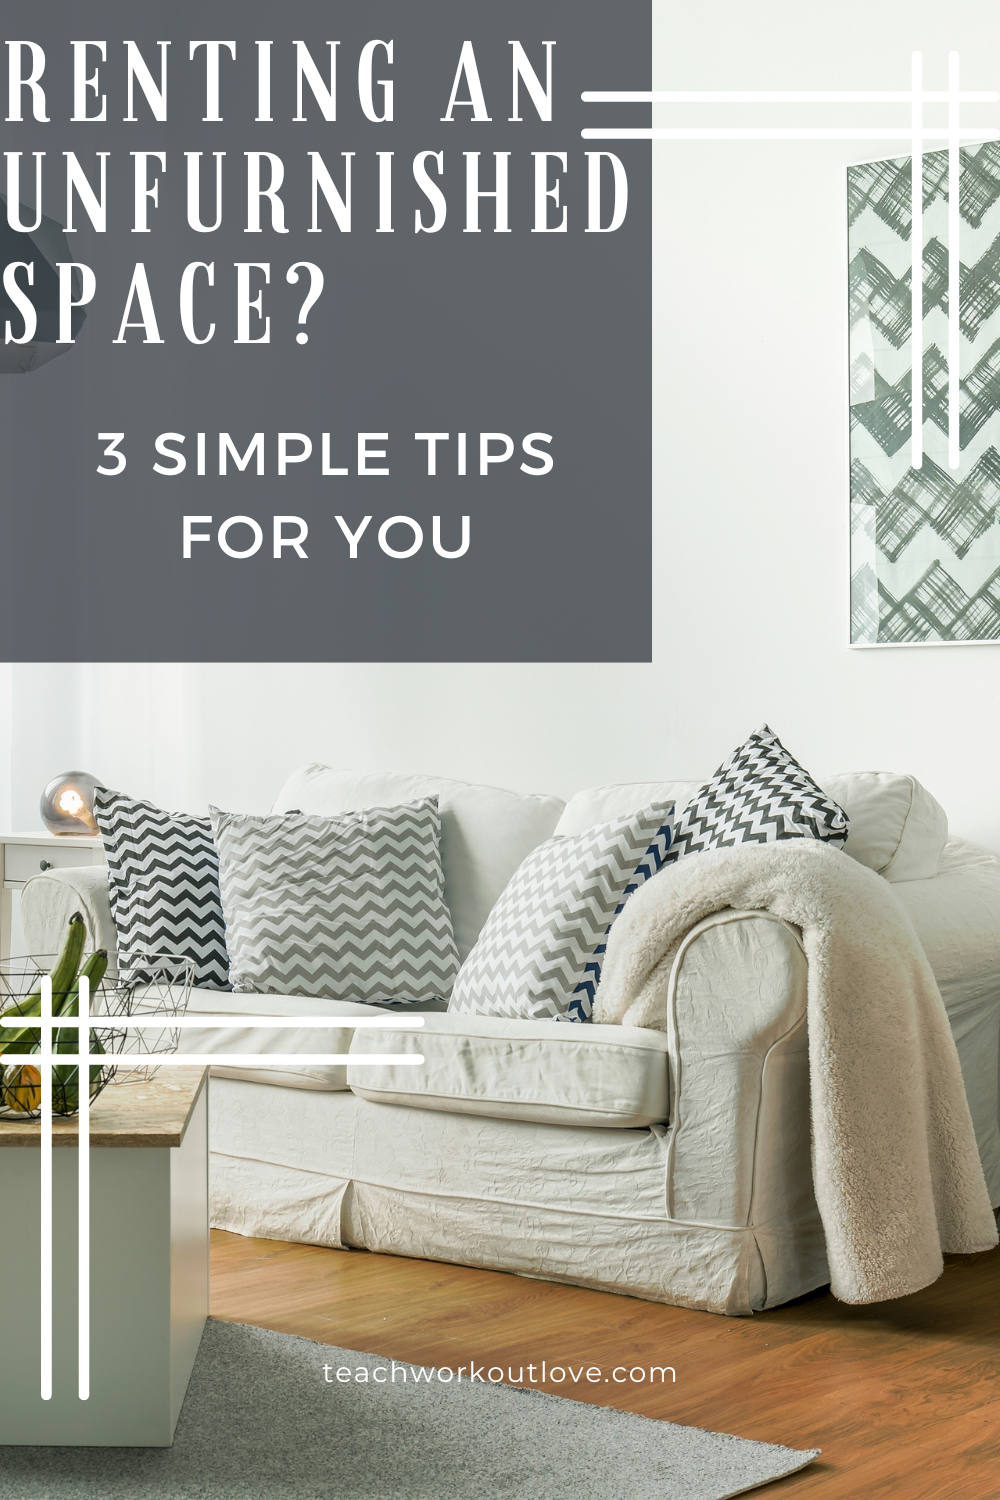 Let’s consider how best to rent an unfurnished space, and what kind of benefit this could provide you: